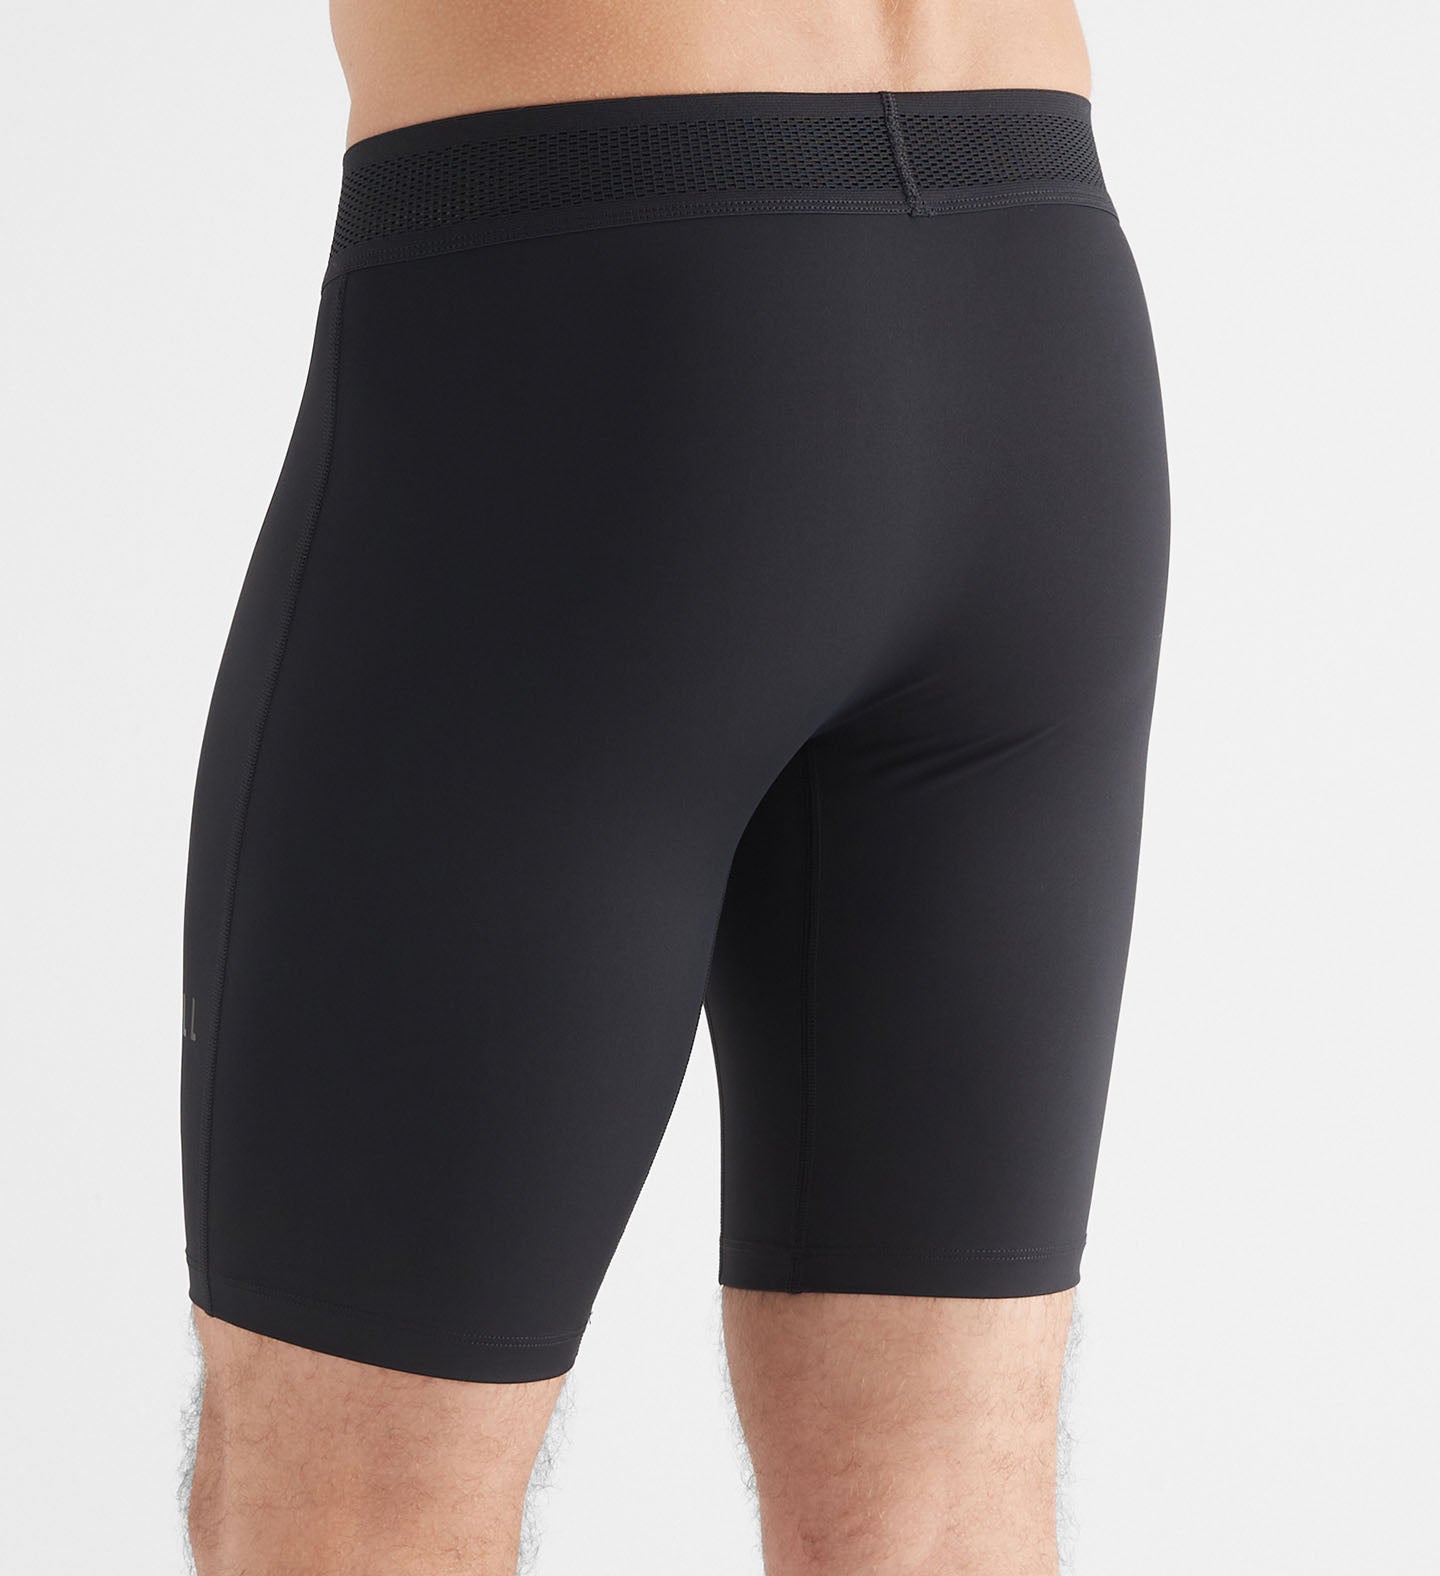 Men's Midweight Seamless Compression Short 9